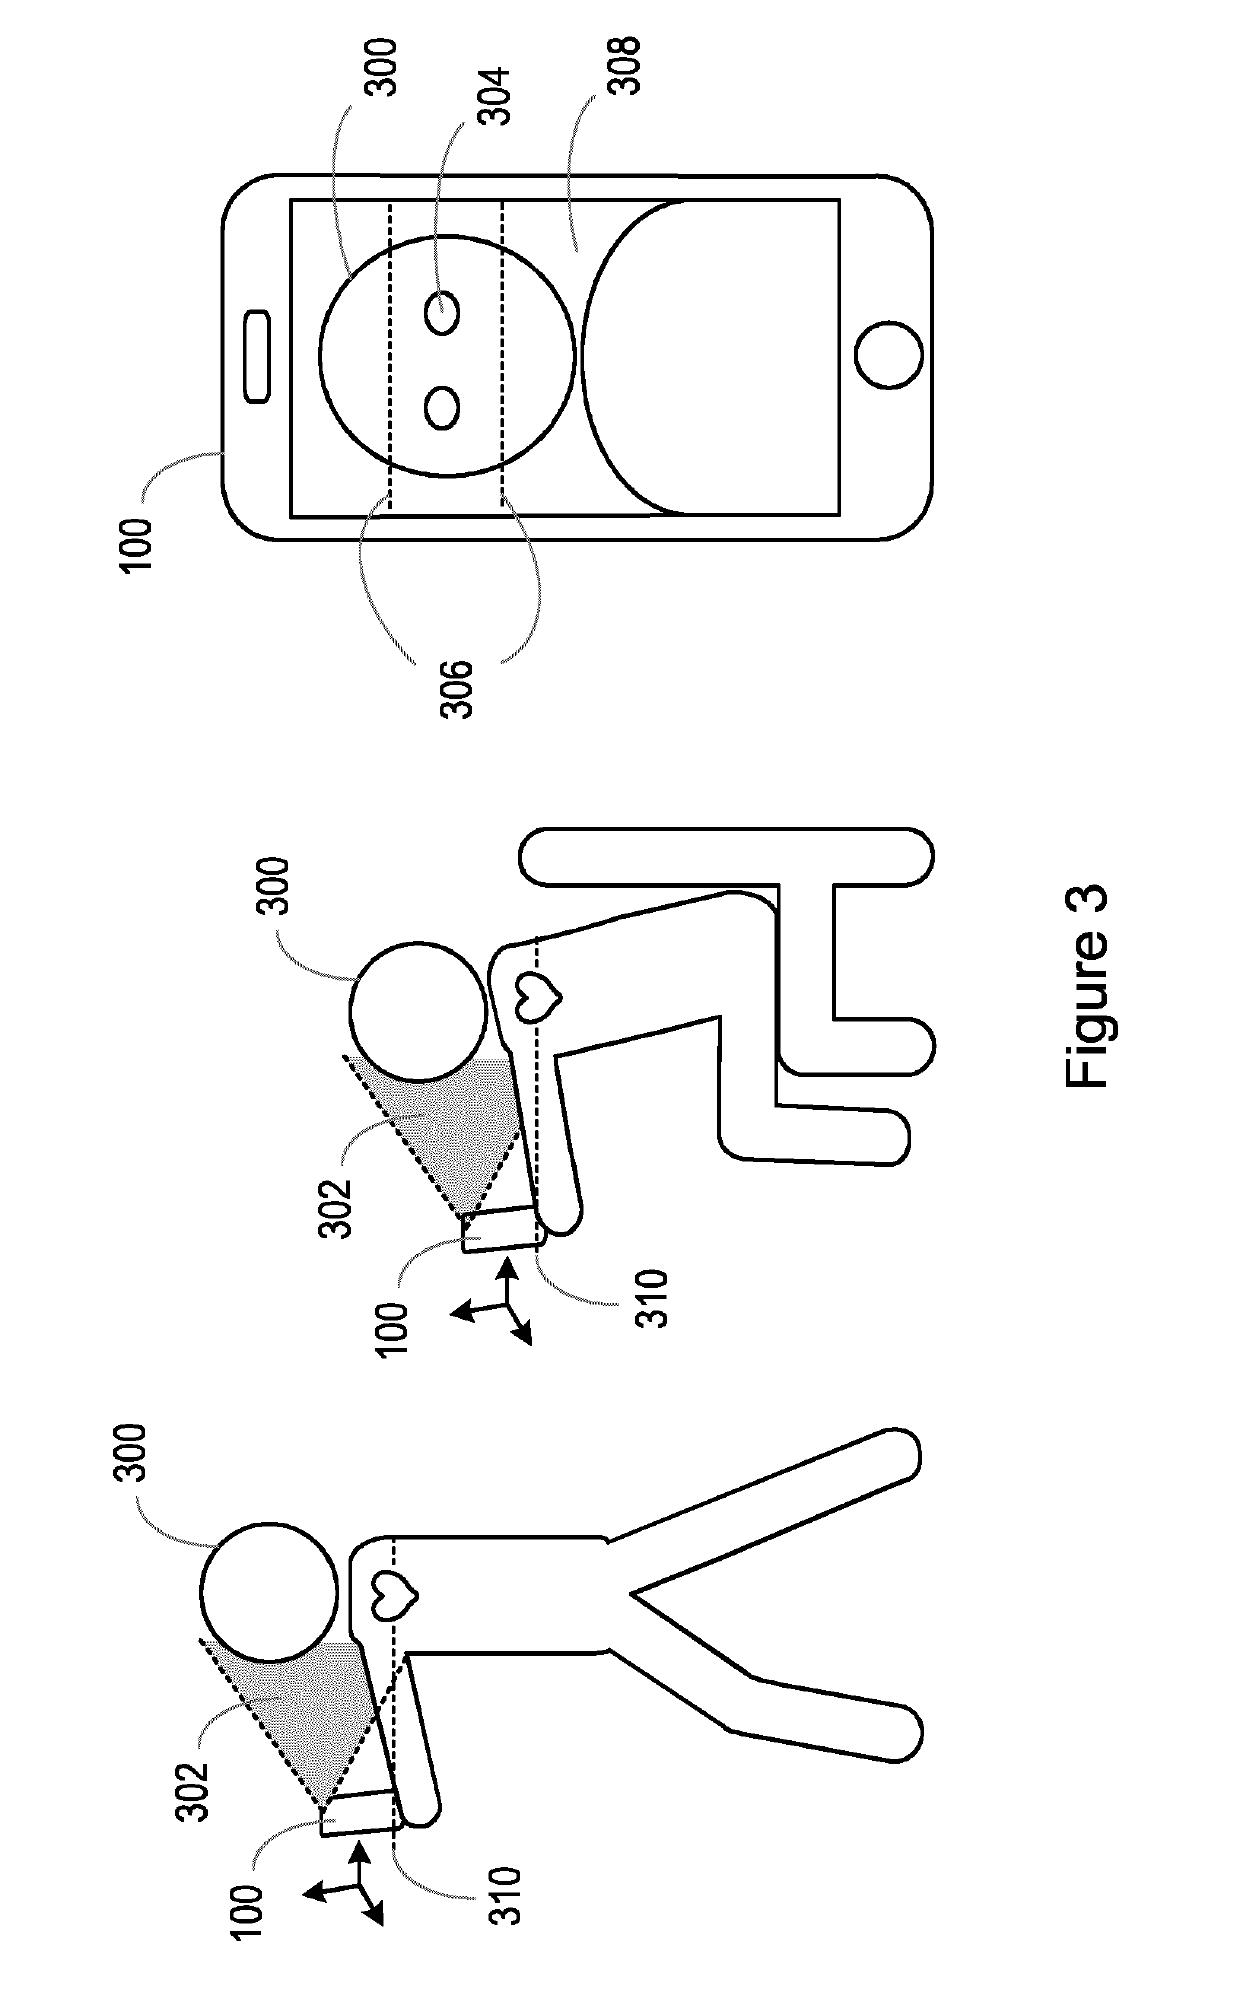 A device comprising a blood pressure sensor and a method for controlling the device